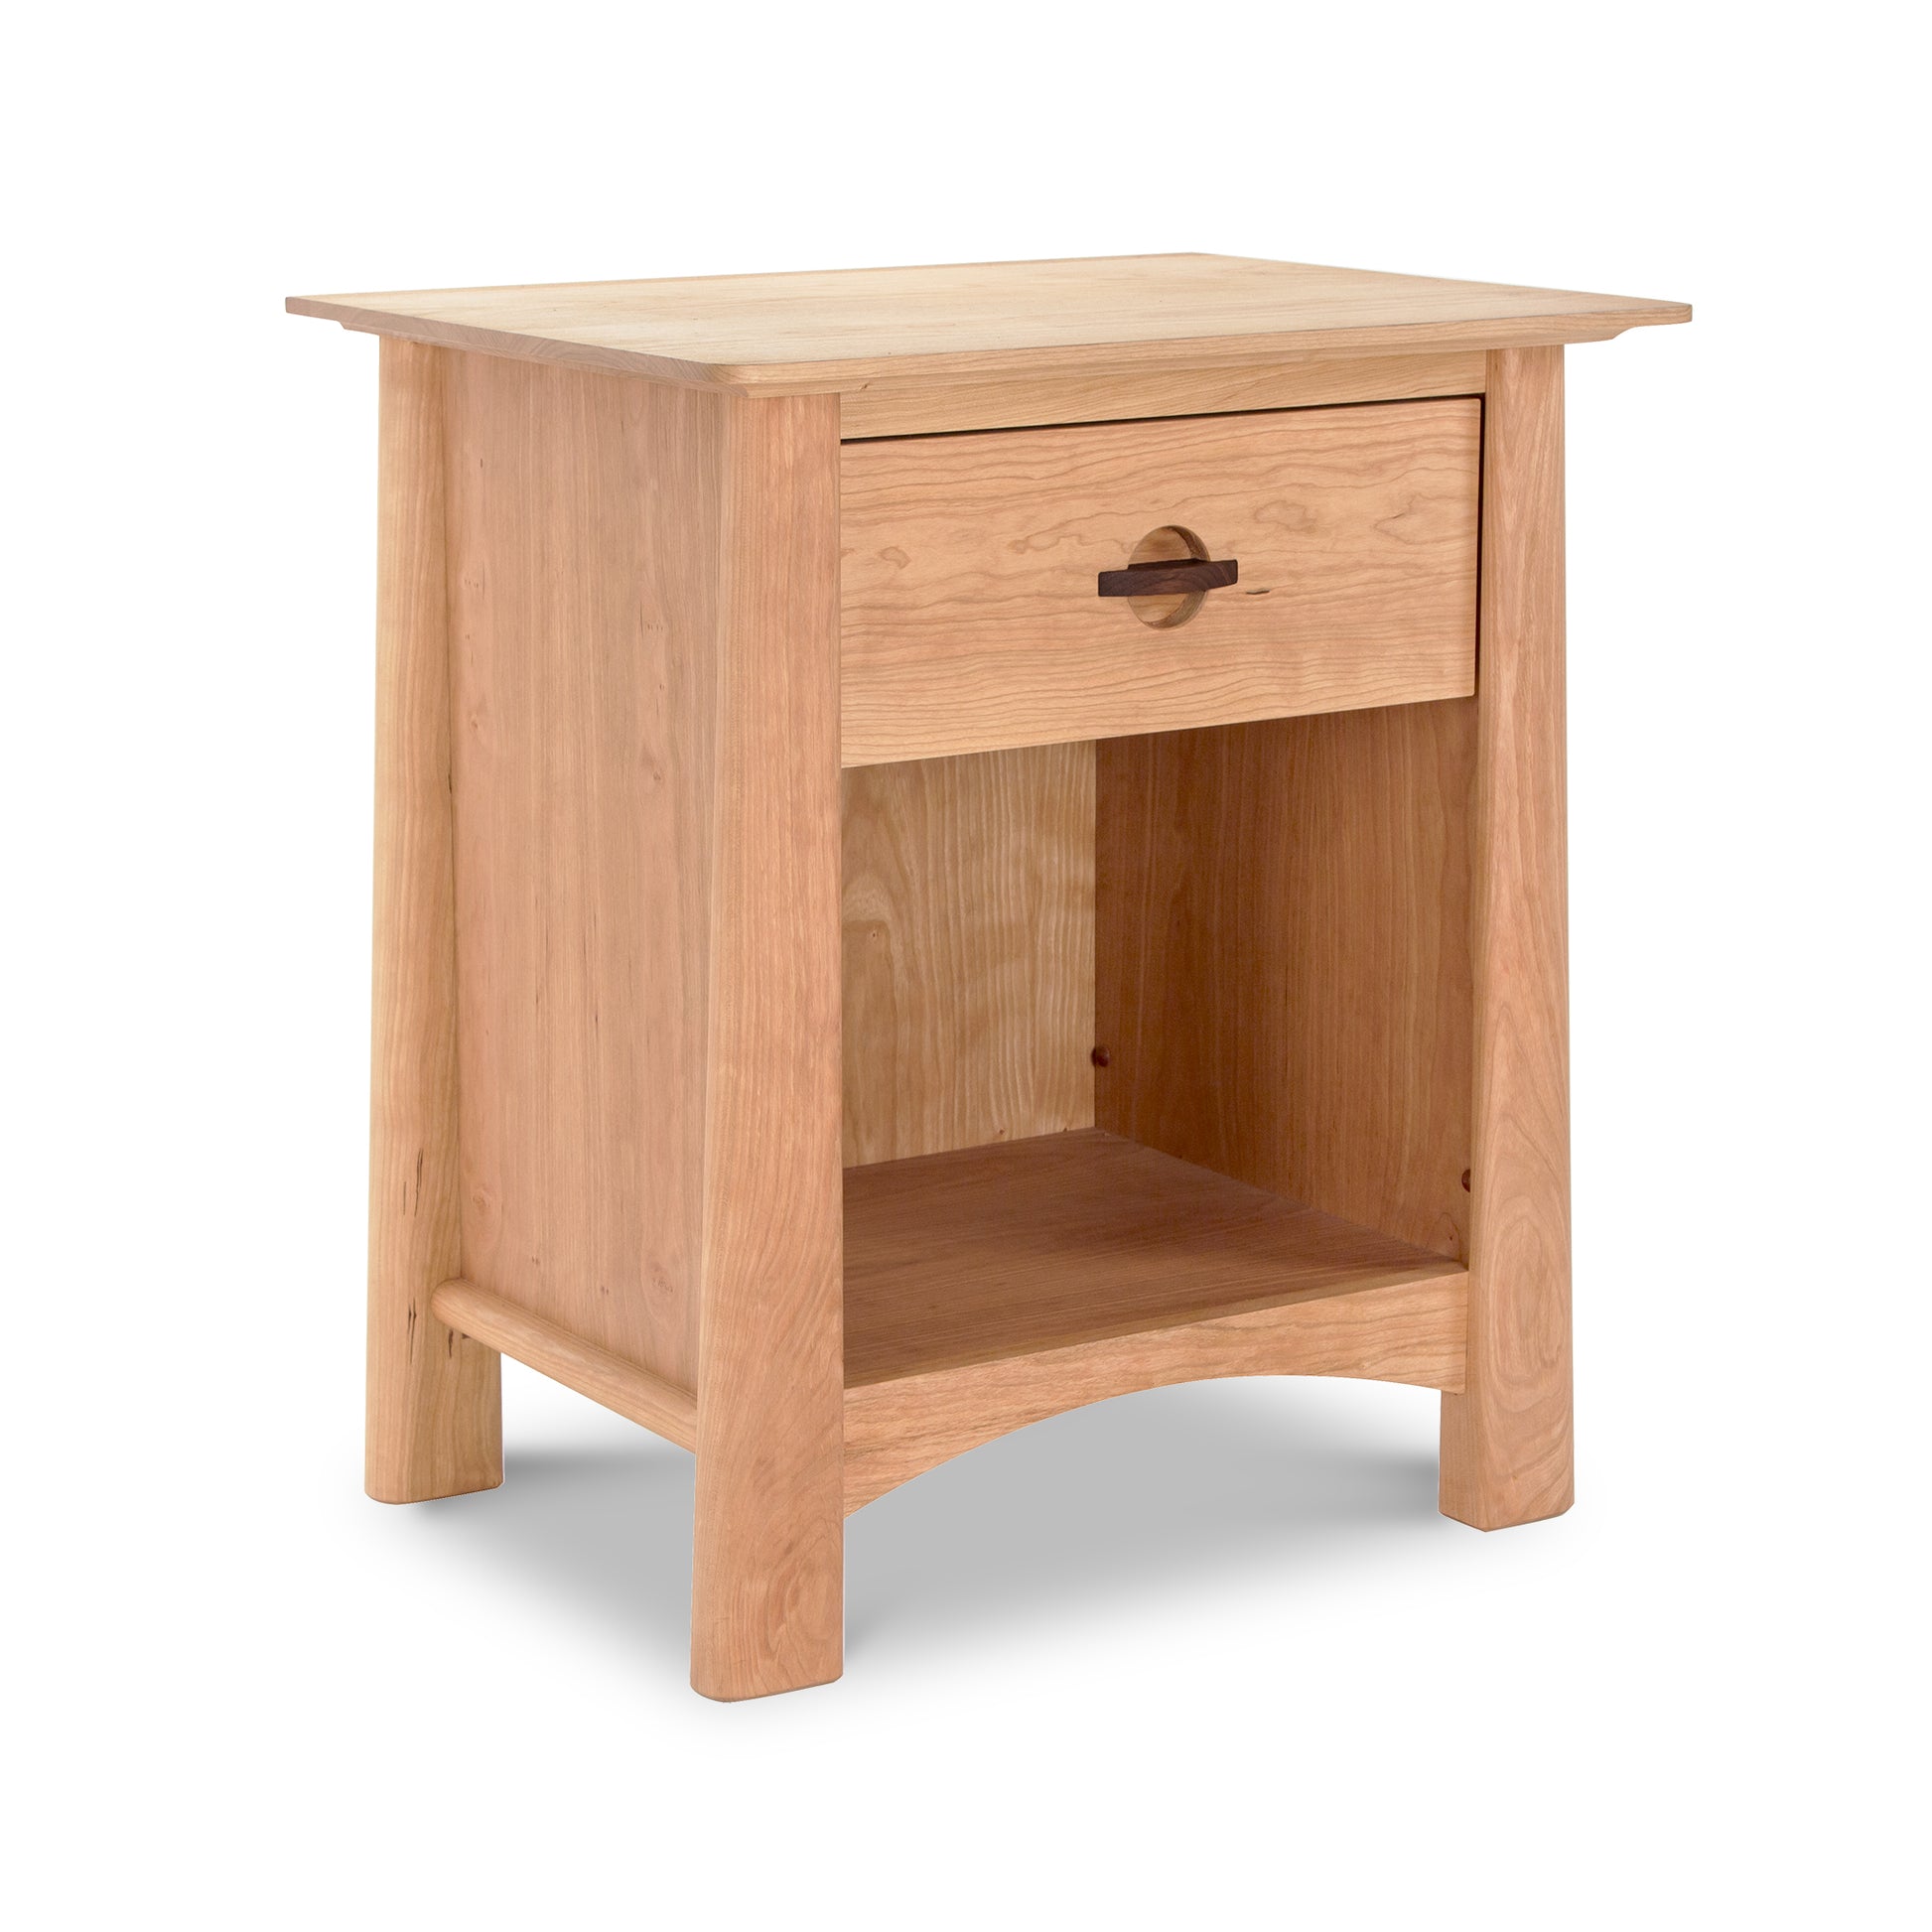 A Maple Corner Woodworks Cherry Moon 1-Drawer Enclosed Shelf Nightstand made from sustainably harvested hardwoods, featuring a single drawer with a metal handle and an open lower shelf, isolated on a white background.